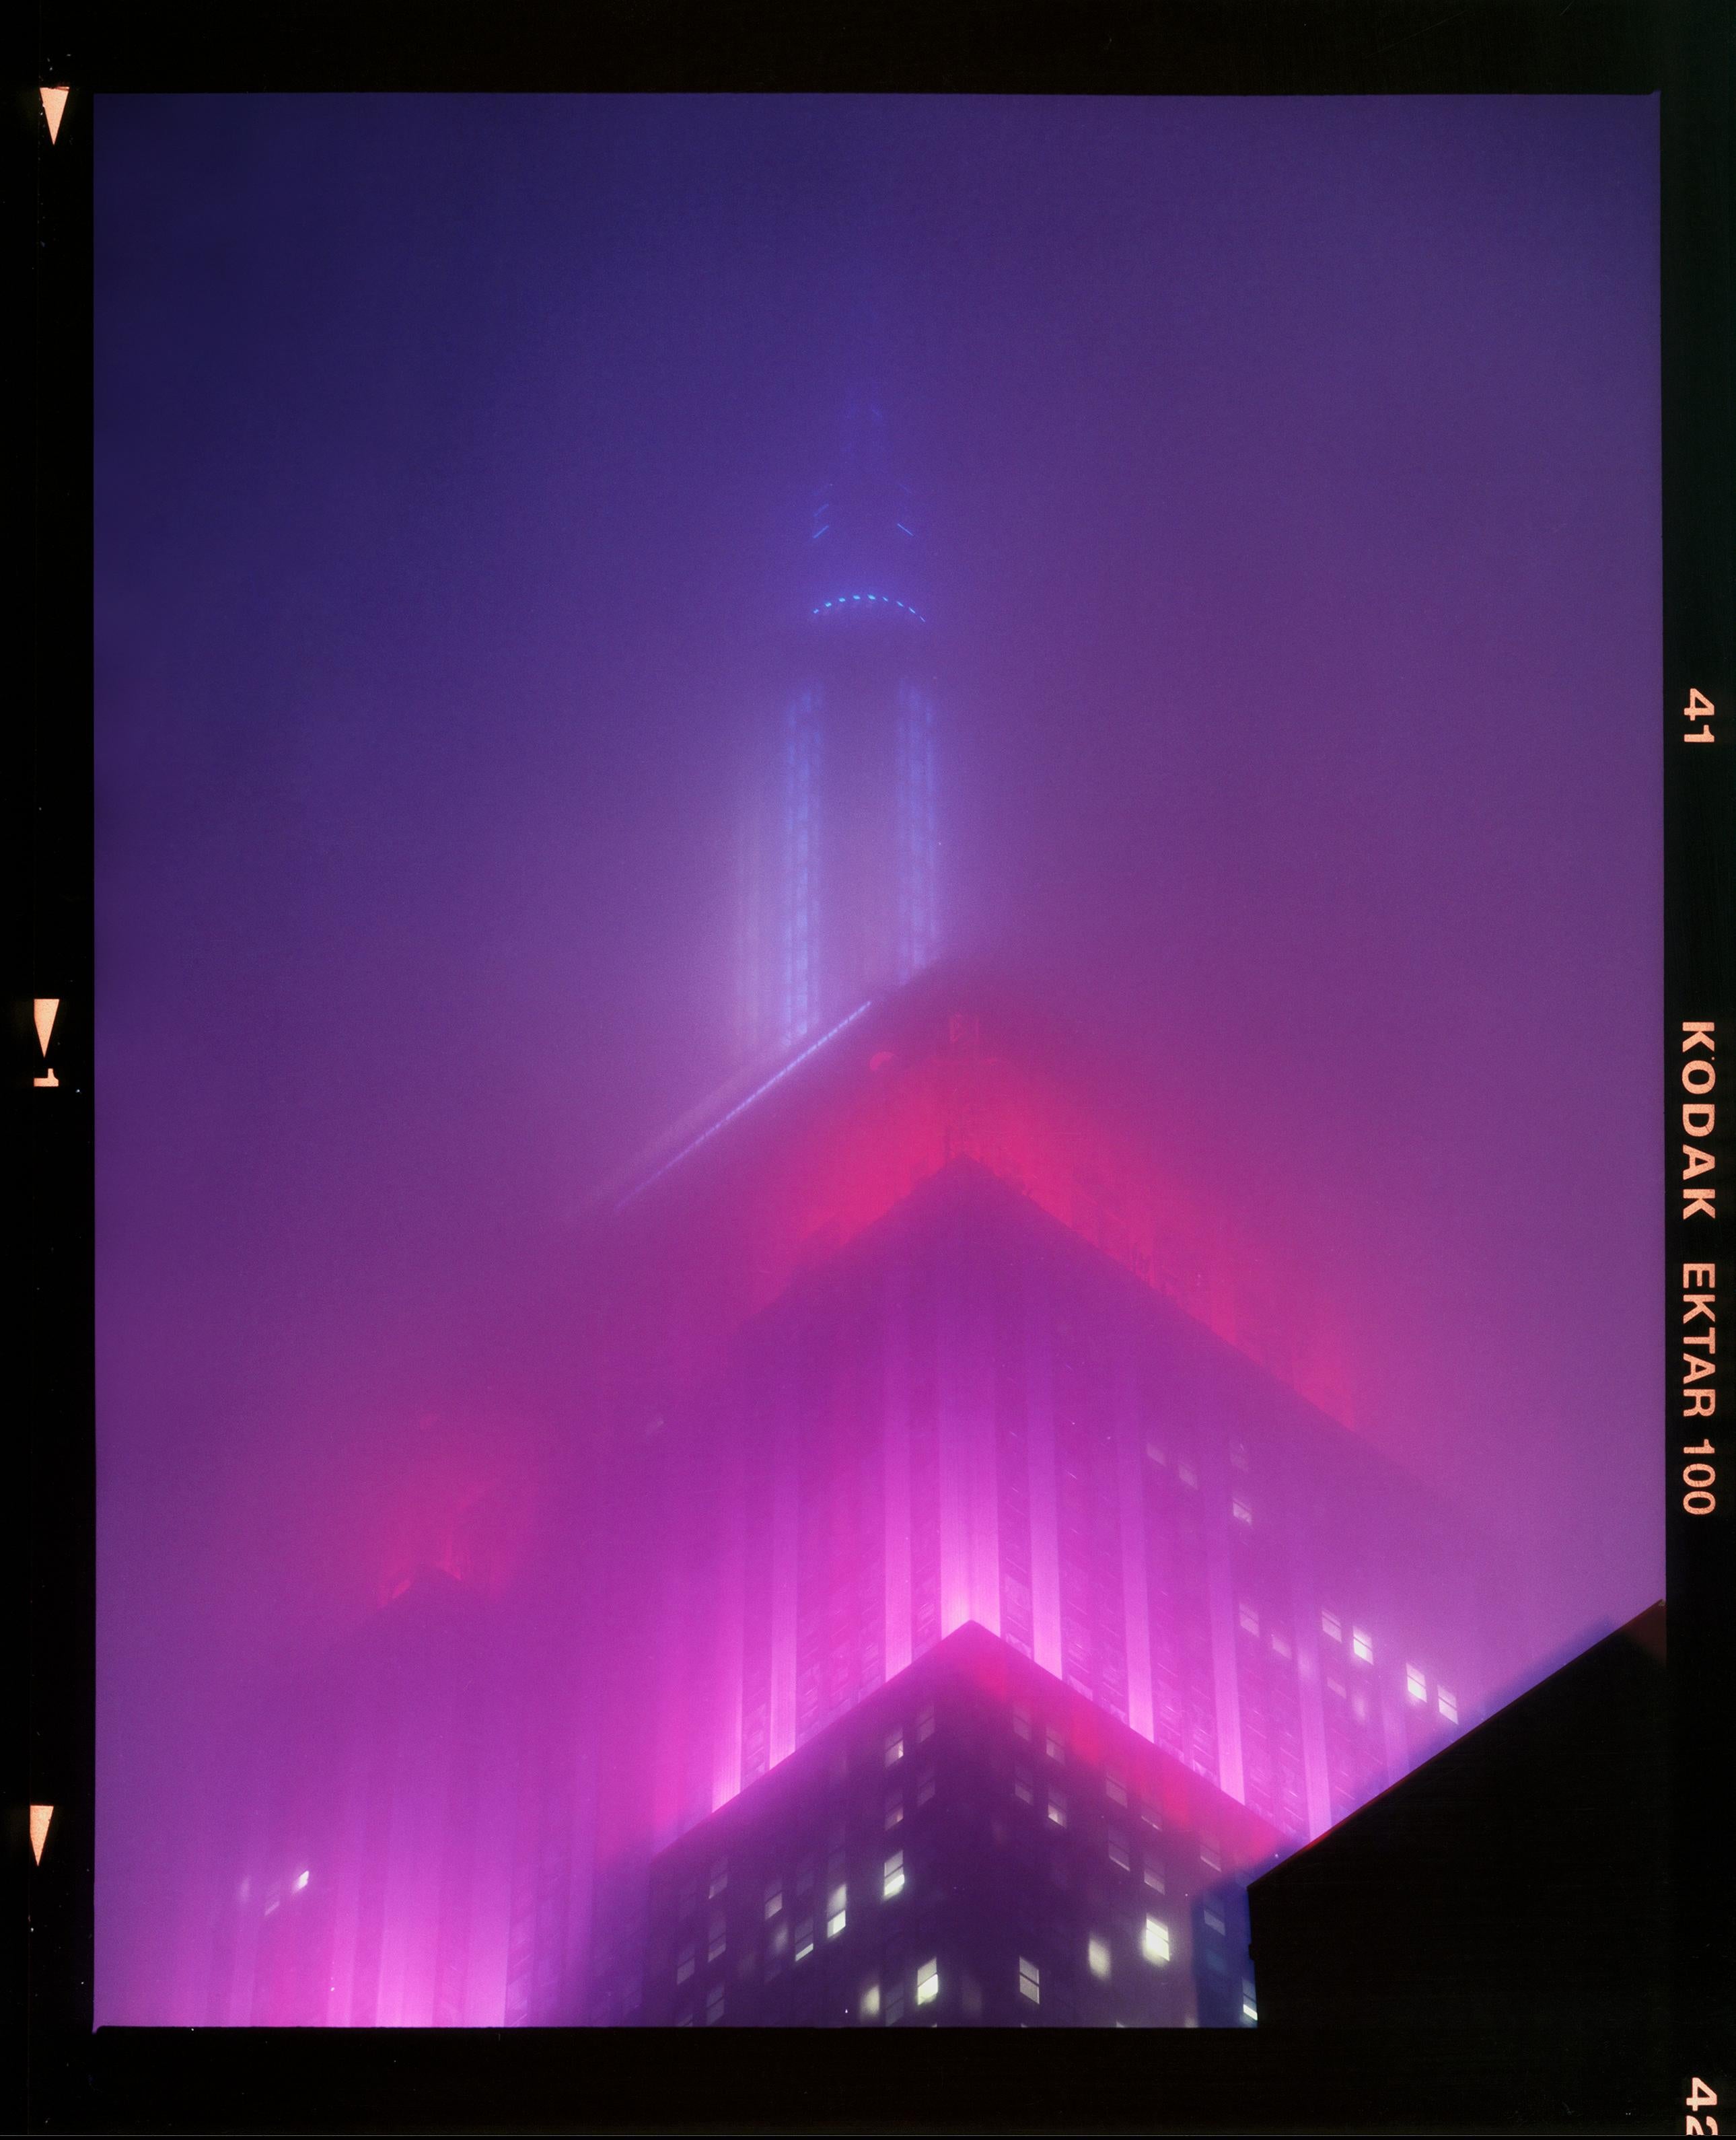 'NOMAD V (Film Rebate)', New York. Richard Heeps has photographed the iconic Empire State building in the mist. The NOMAD sequence of photographs capture the art deco architecture illuminated by changing colours, and is part of Richard's street